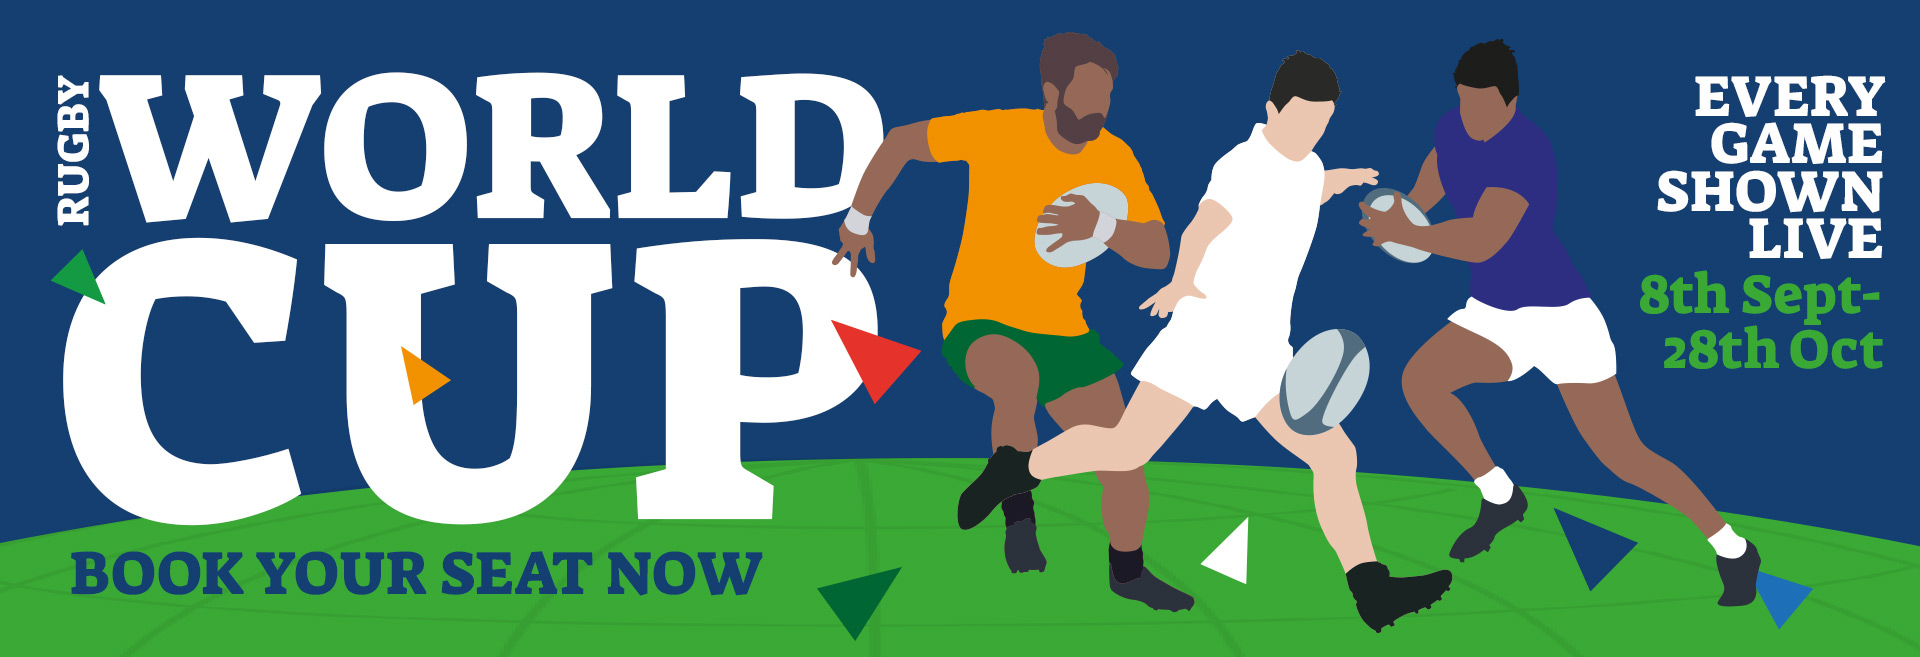 Watch the Rugby World Cup at The Drayton Arms